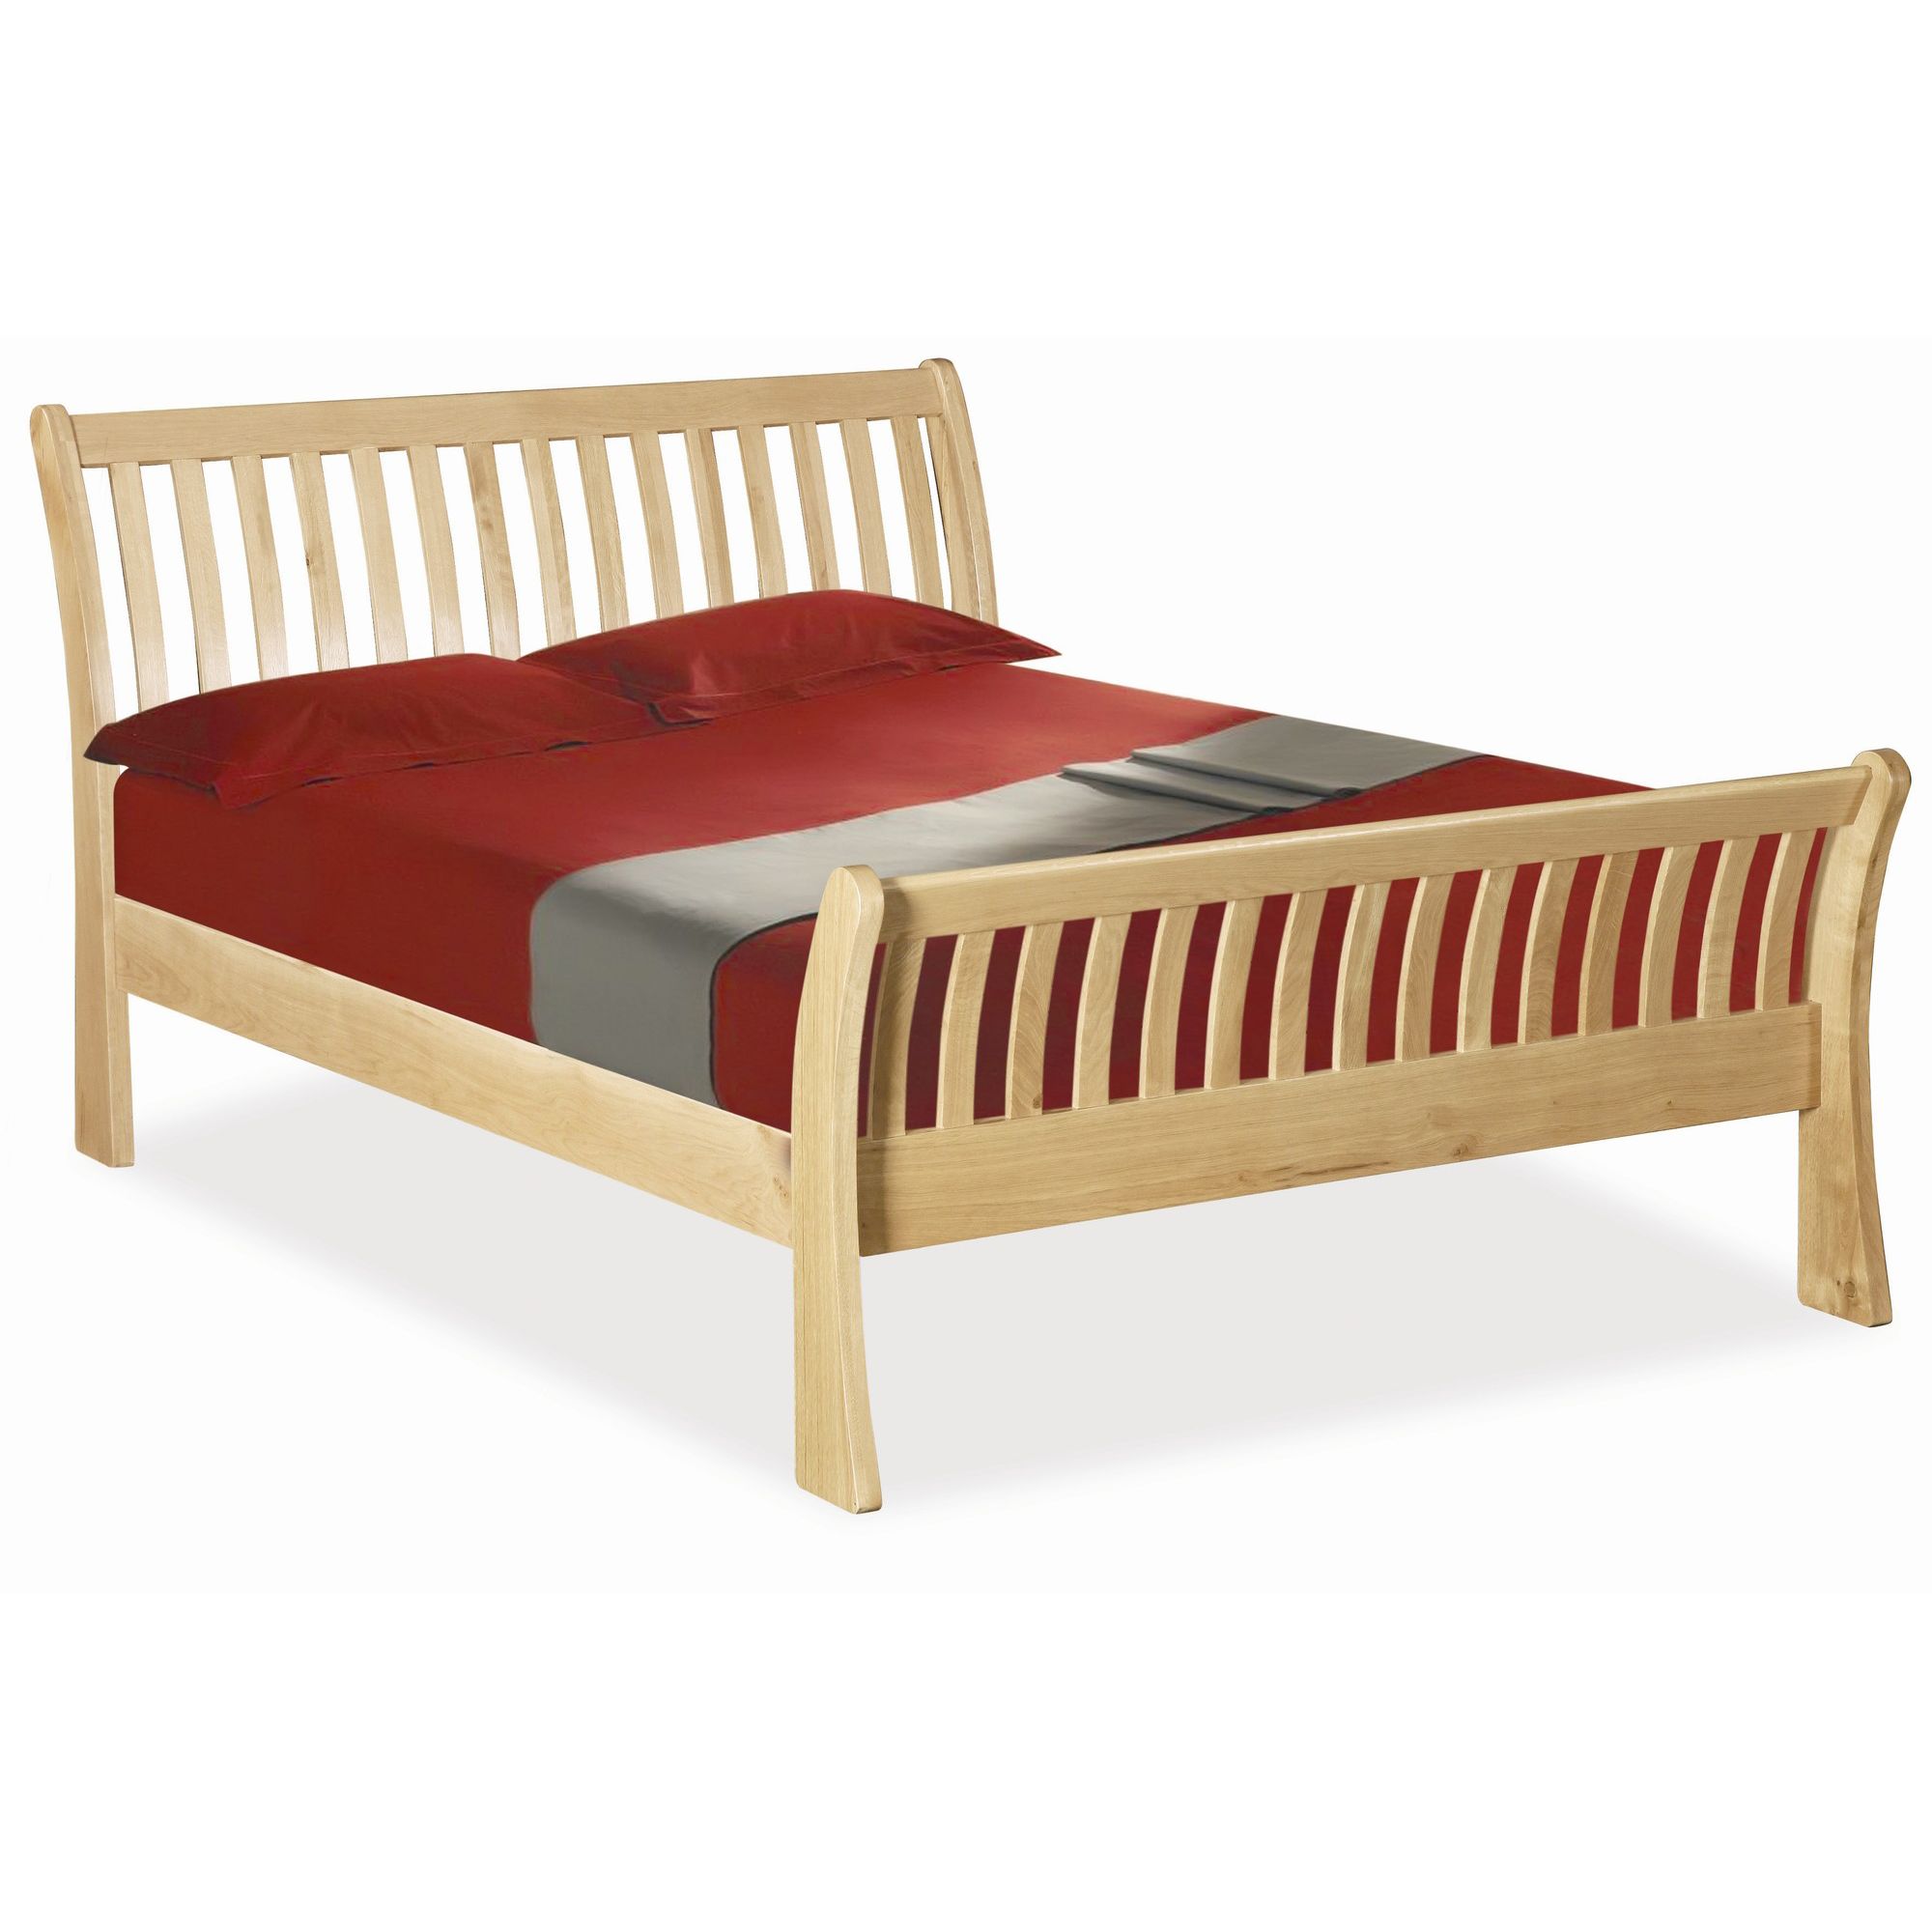 Alterton Furniture Chatsworth Sleigh Bed - King at Tesco Direct